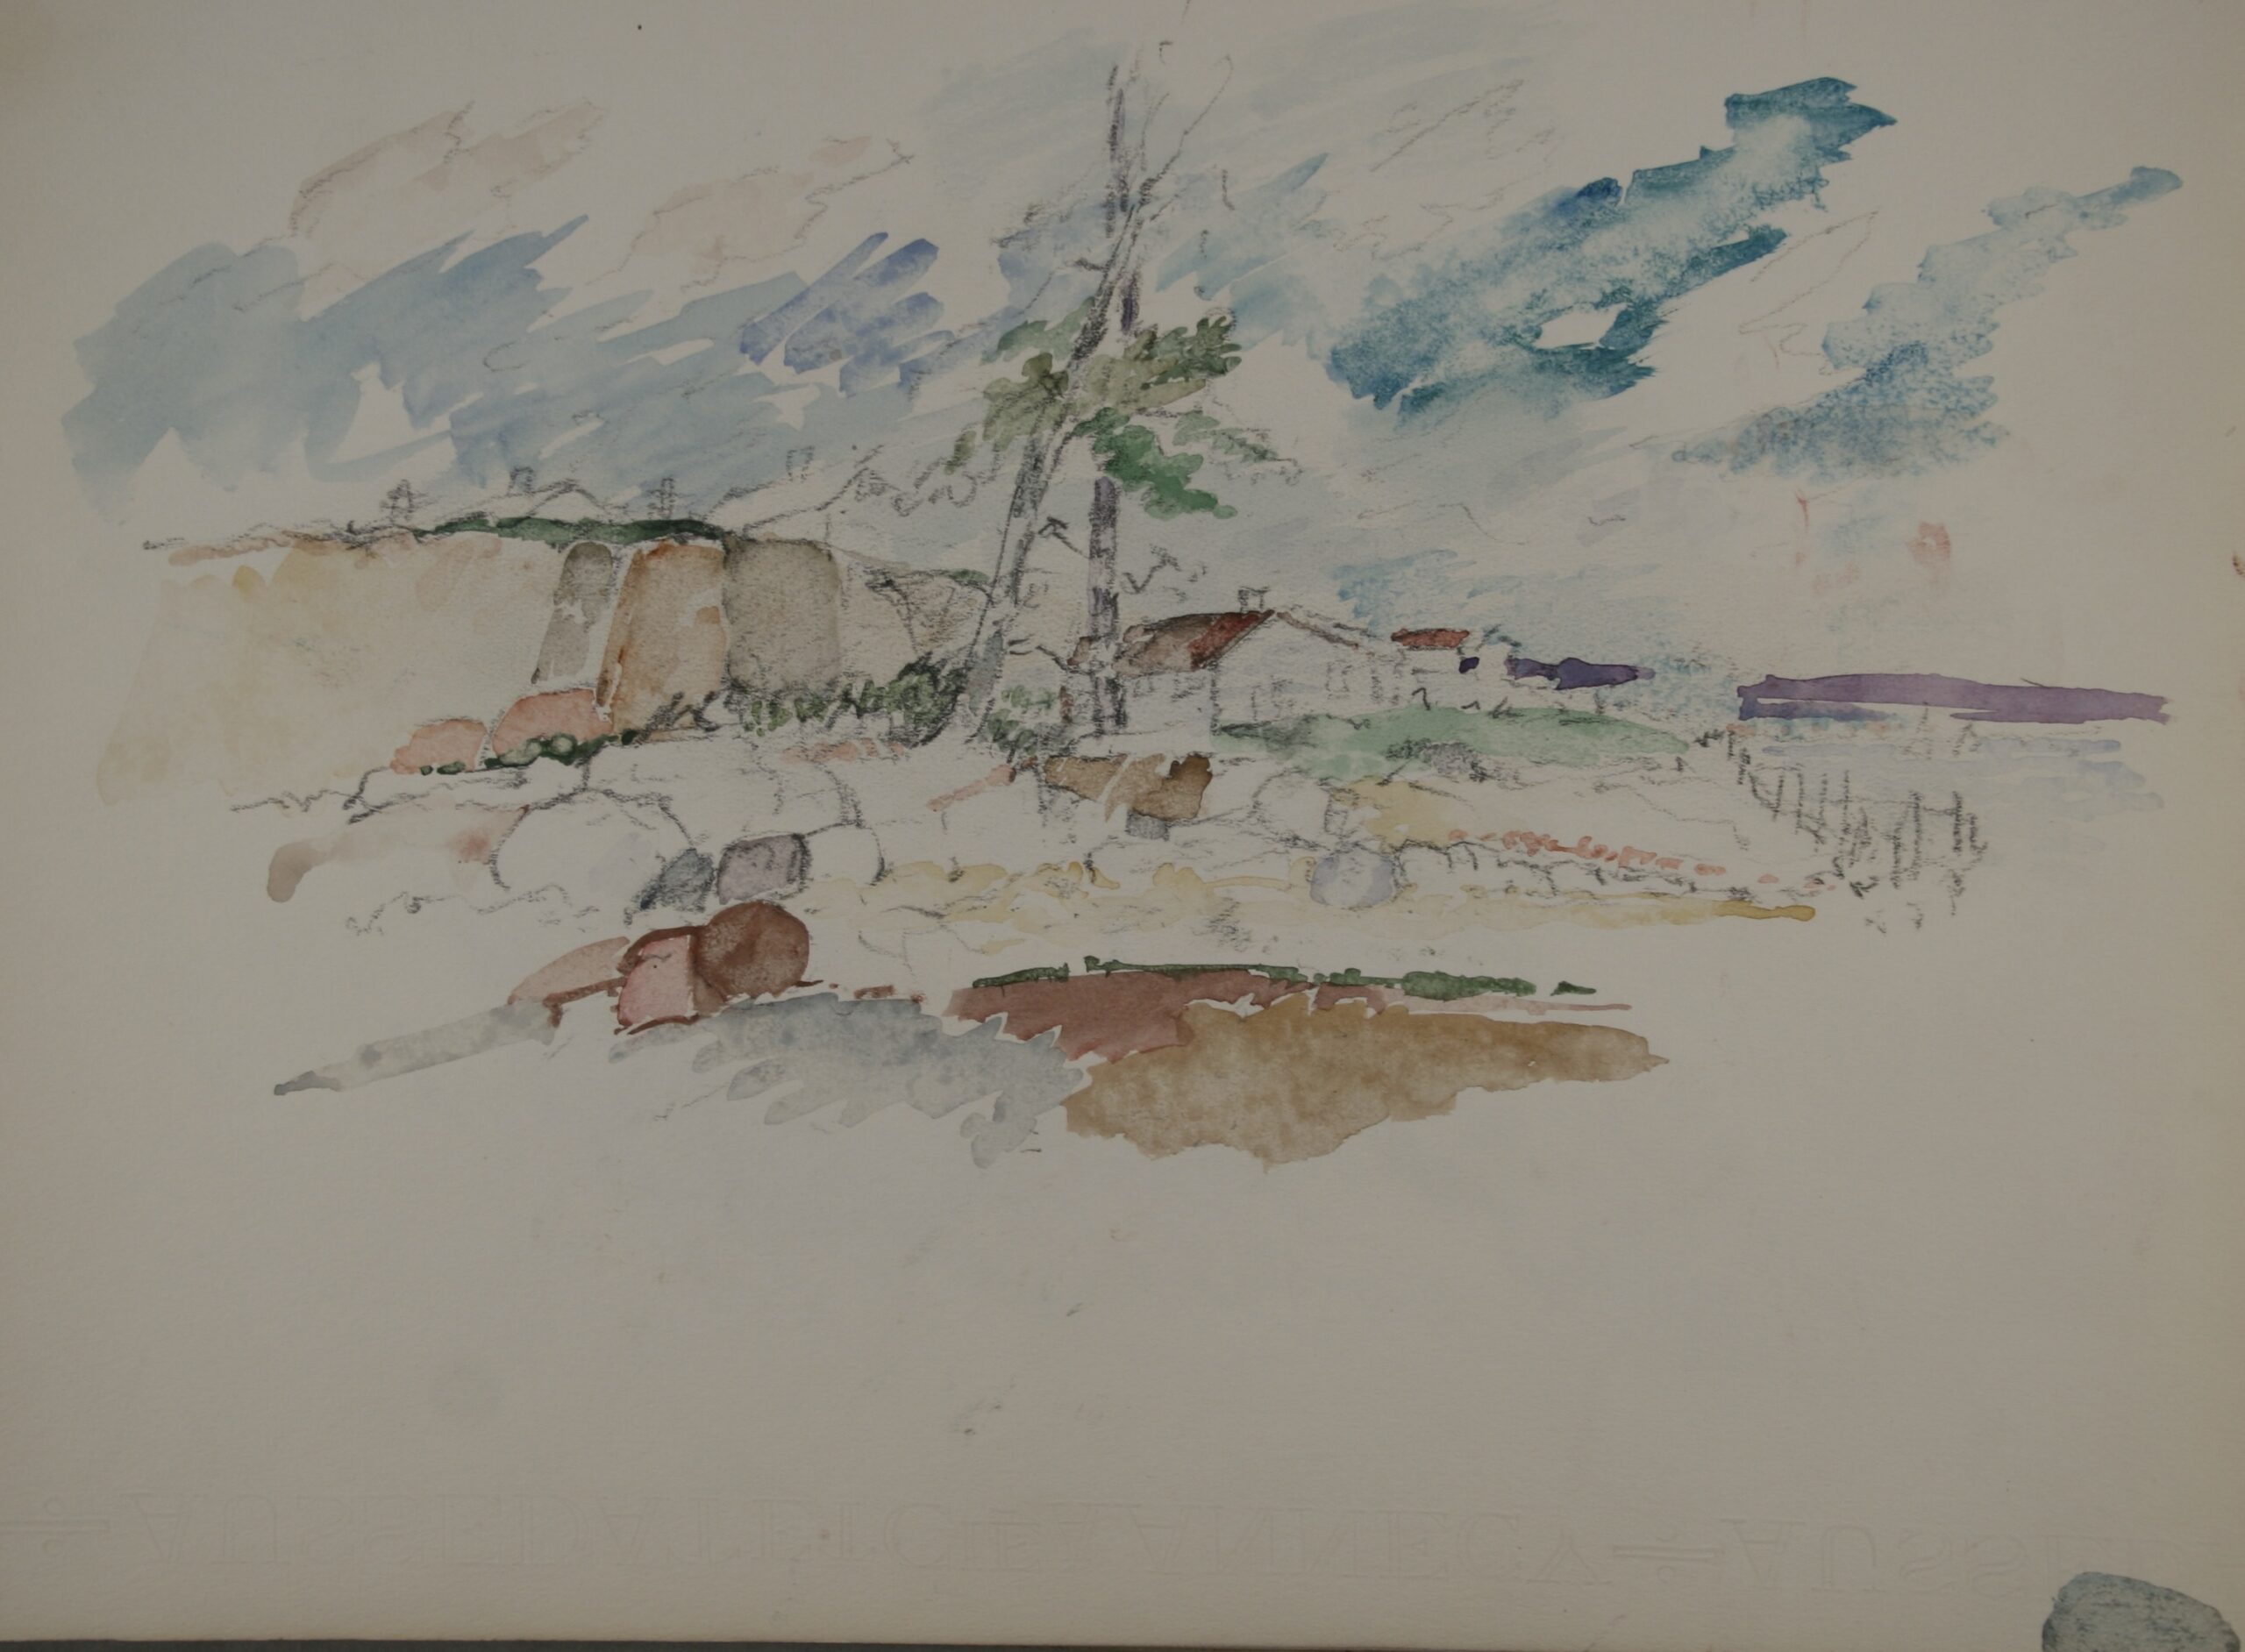 John Edward Heliker (American, 1909-2000), <i>Landscape</i>, n.d., charcoal, watercolor. Museums Collections, Gift of Heliker LaHotan Foundation